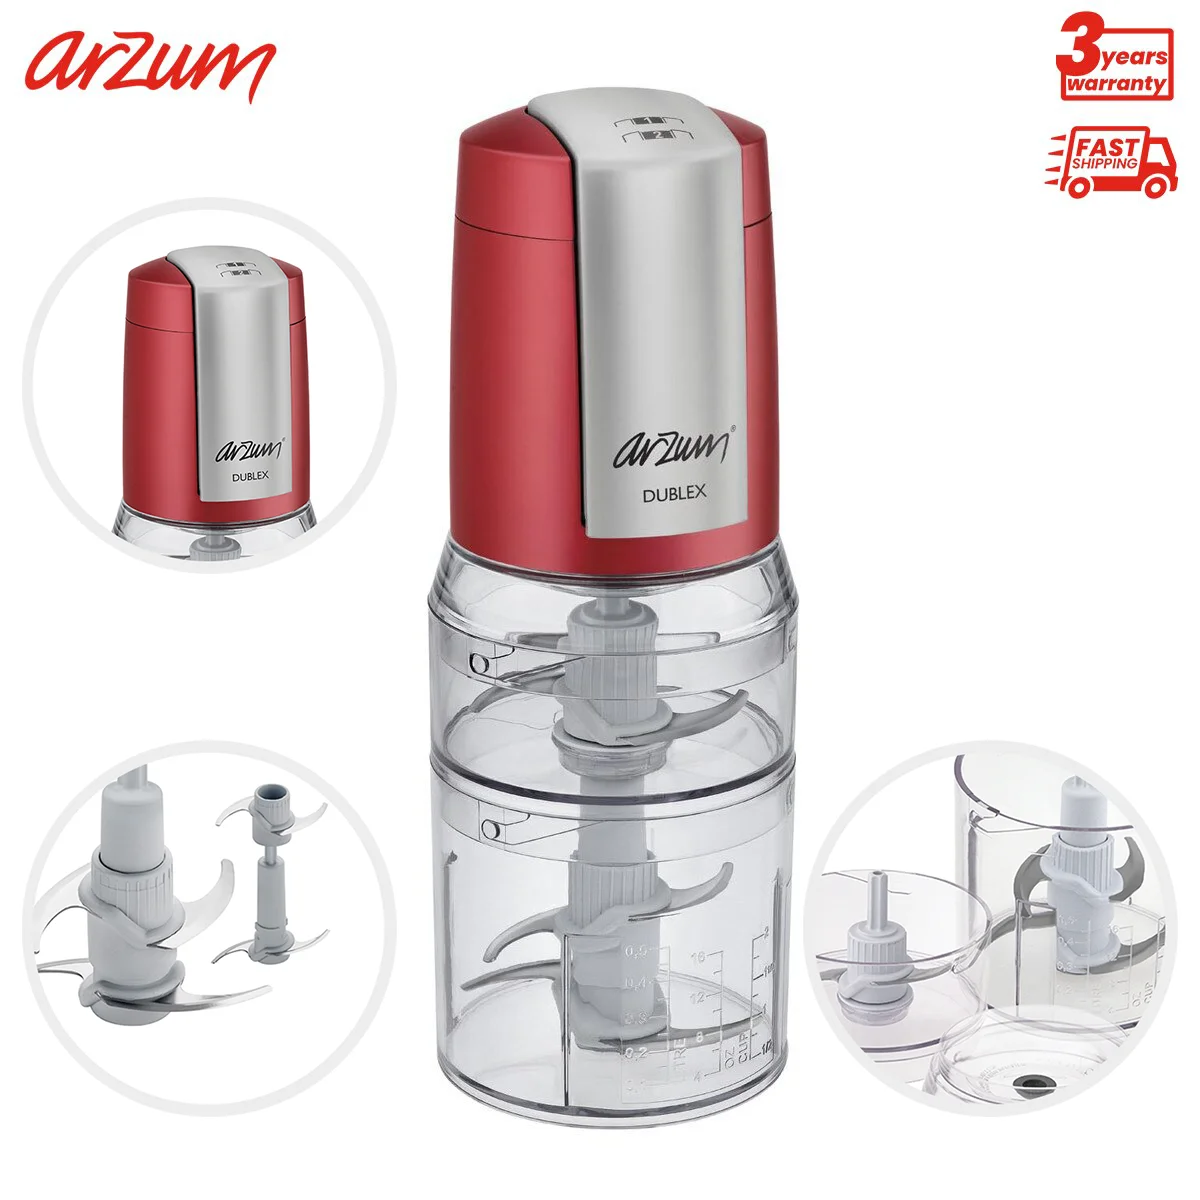 Arzum Duplex Twin Beam Chopper Electric Kitchen Appliances Automatic Double-Deck Stainless Steel Chopping Knives